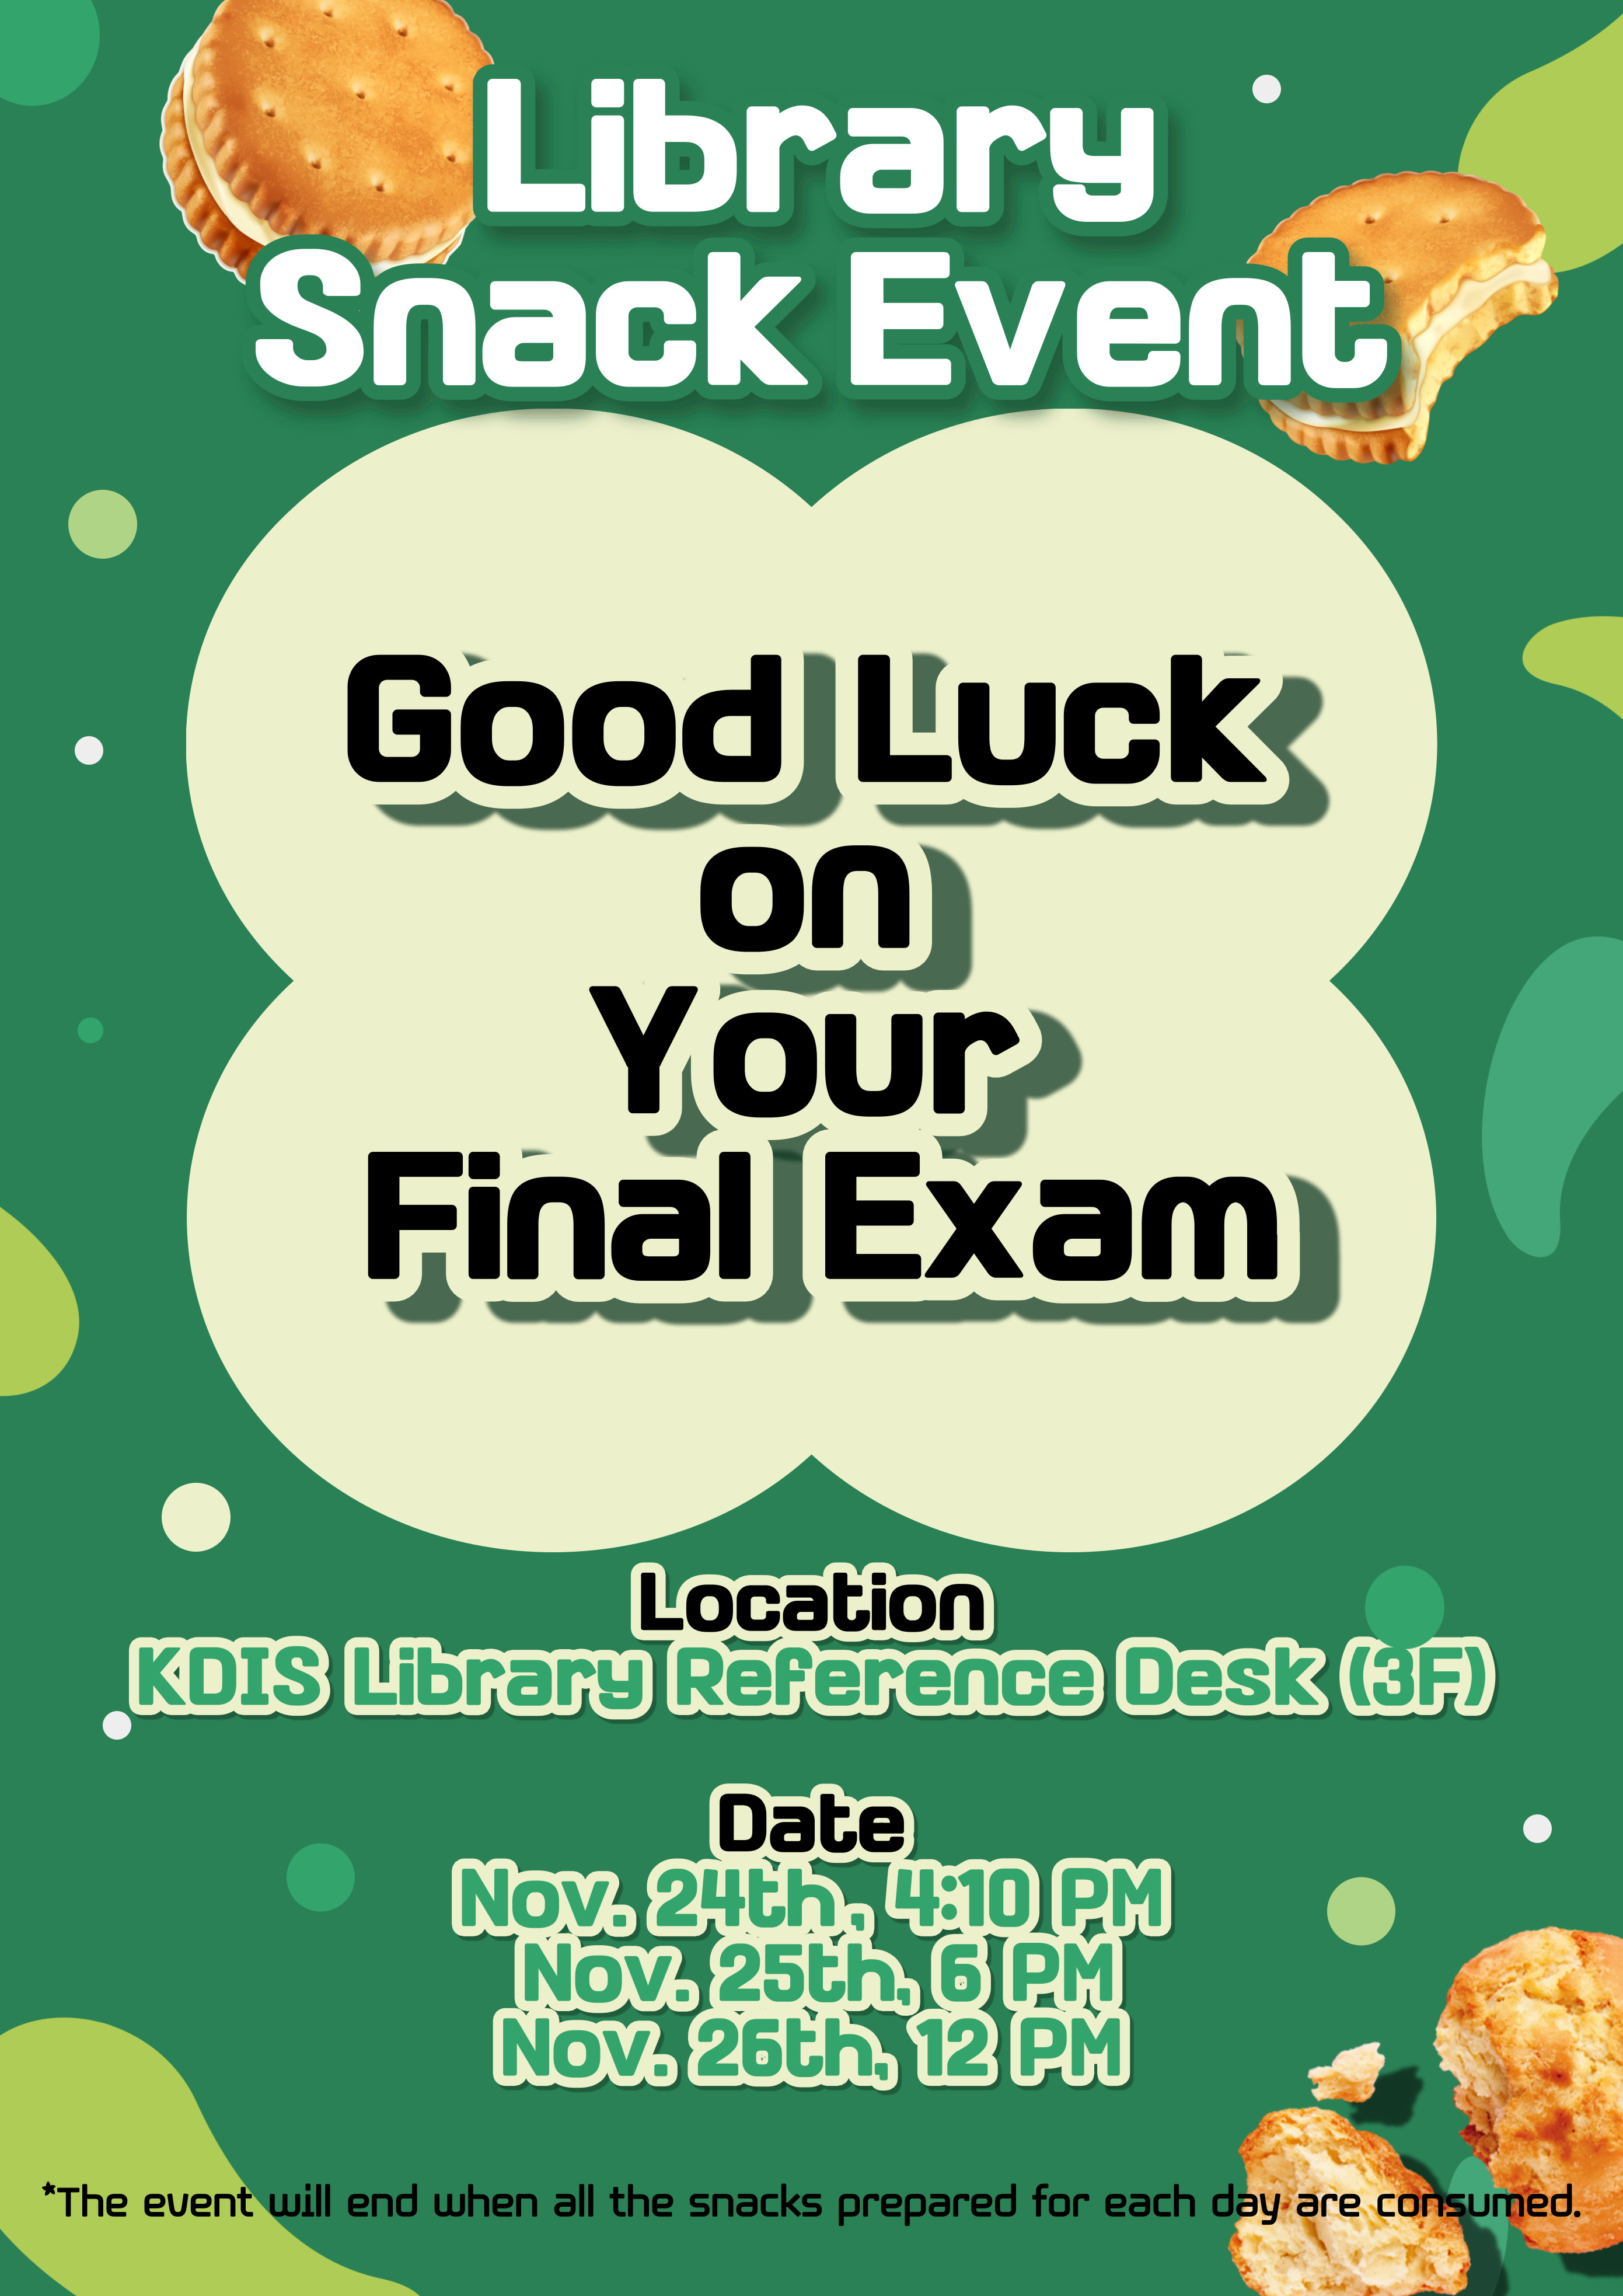    Library Snack Event   Good Luck on Your Final Exam   Location KDIS Library Reference Desk (3F)   Date   Nov. 24th, 4:10 PM   Nov. 25th, 6 PM   Nov. 26th, 12 PM   *The event will end when all the snacks prepared for each day are consumed.   